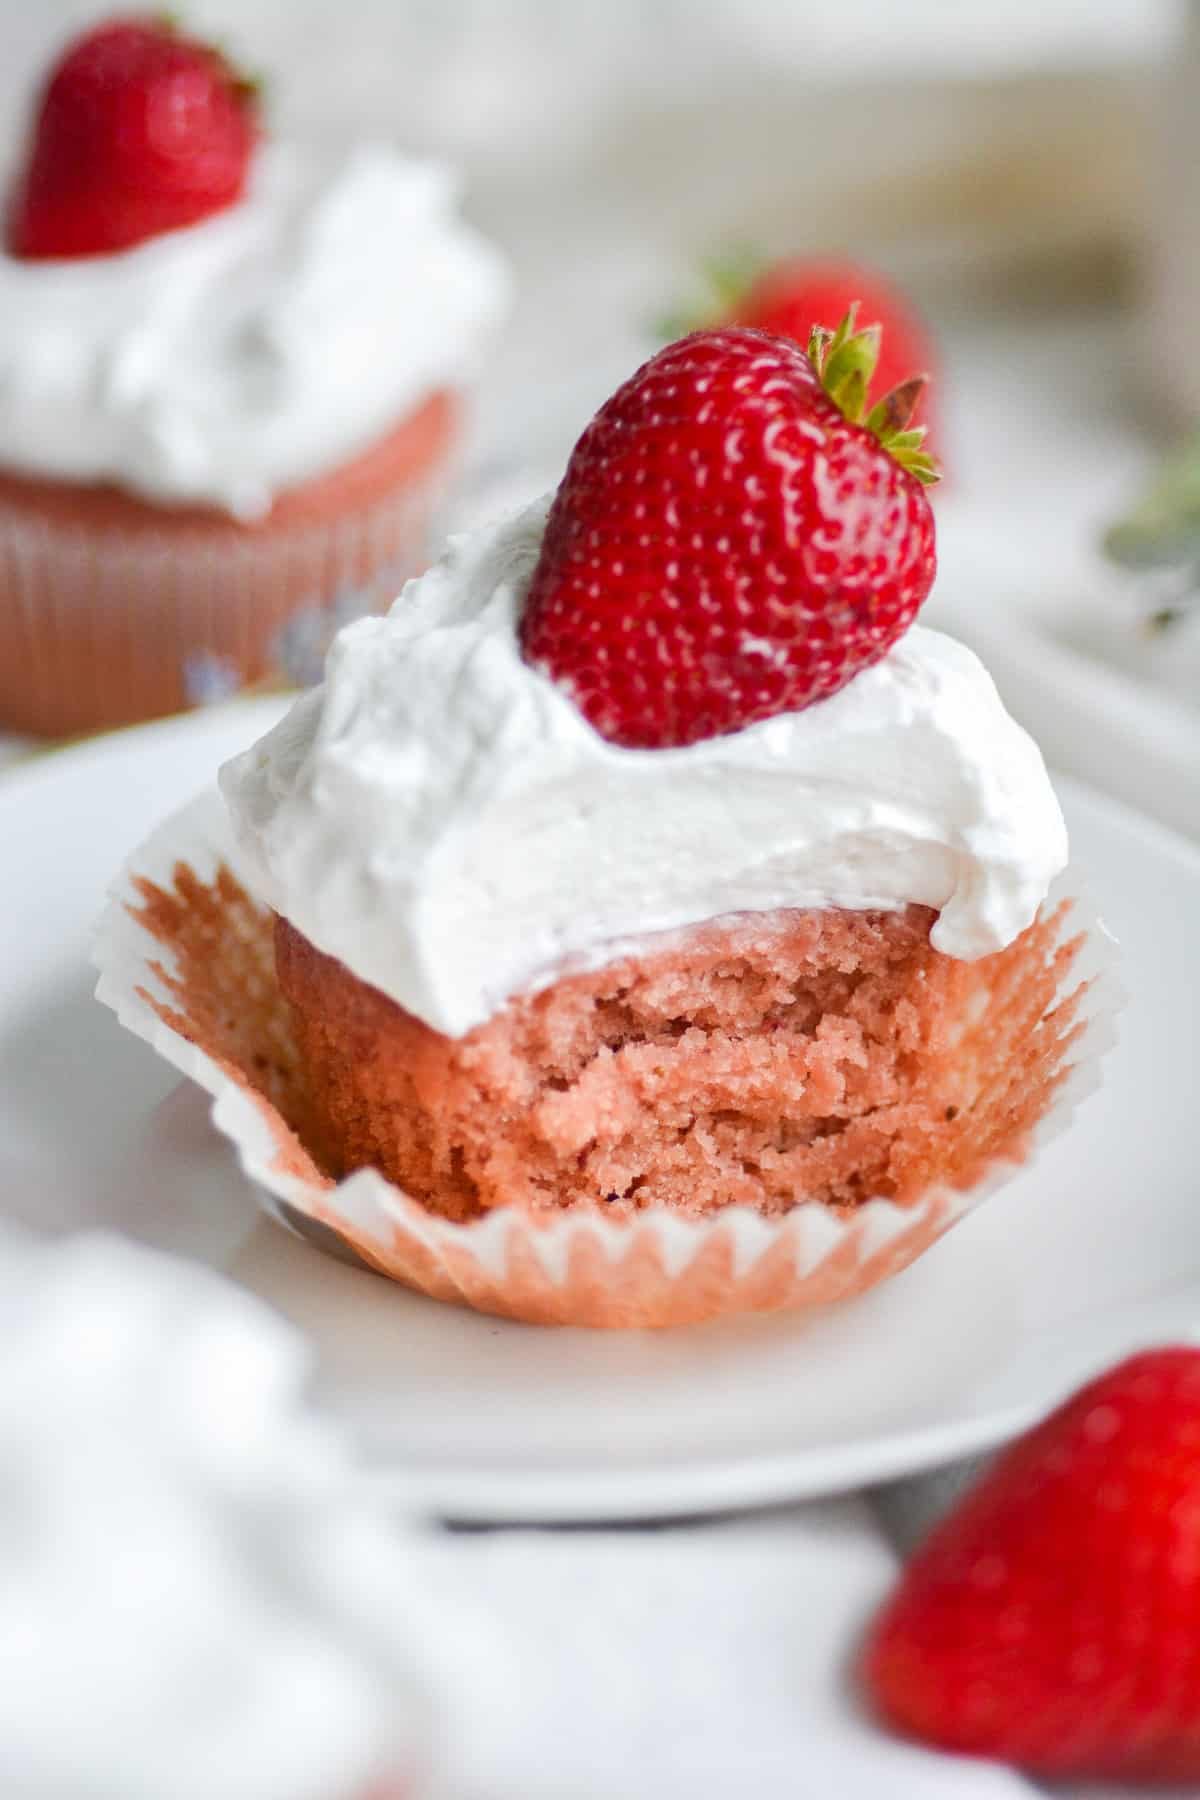 A bite taken out of a vegan strawberry and cream cupcake